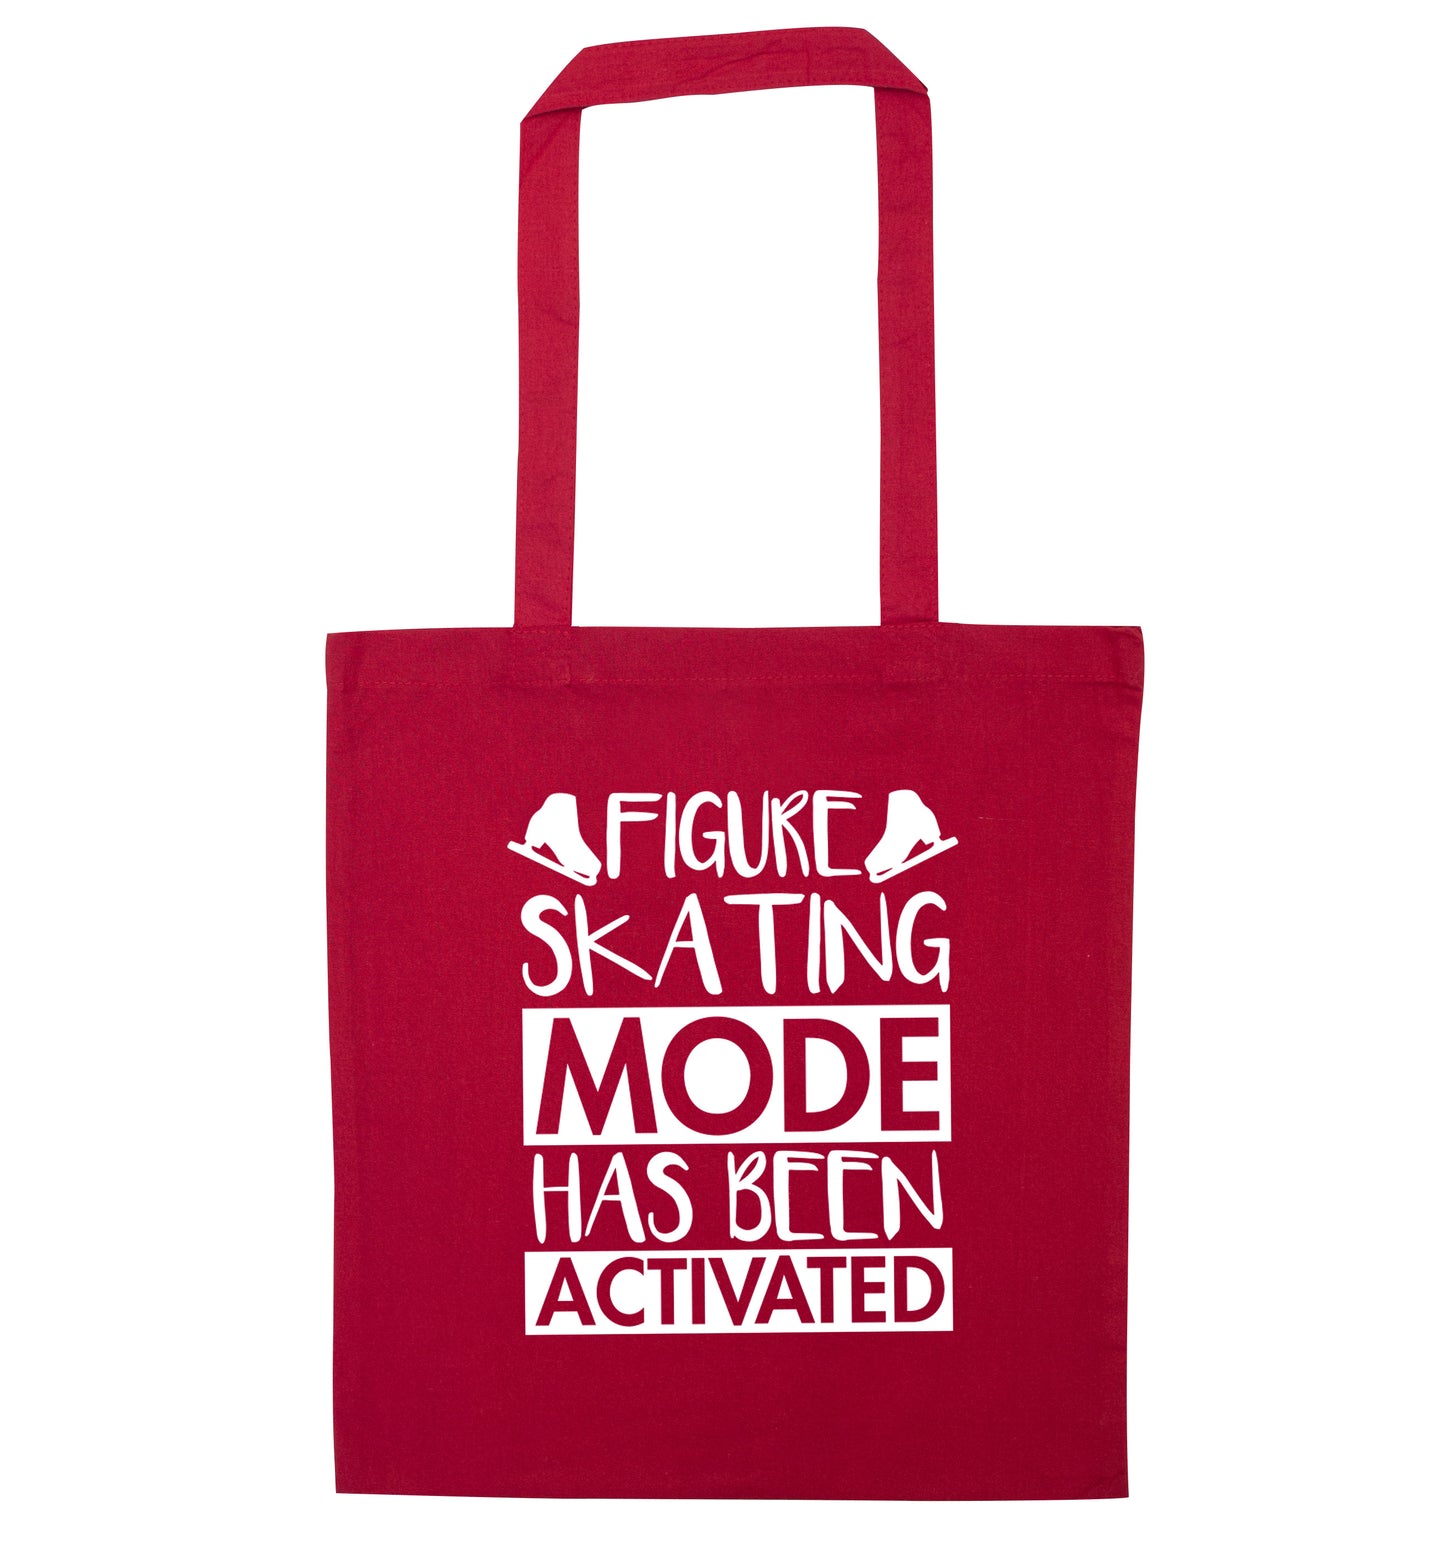 Figure skating mode activated red tote bag